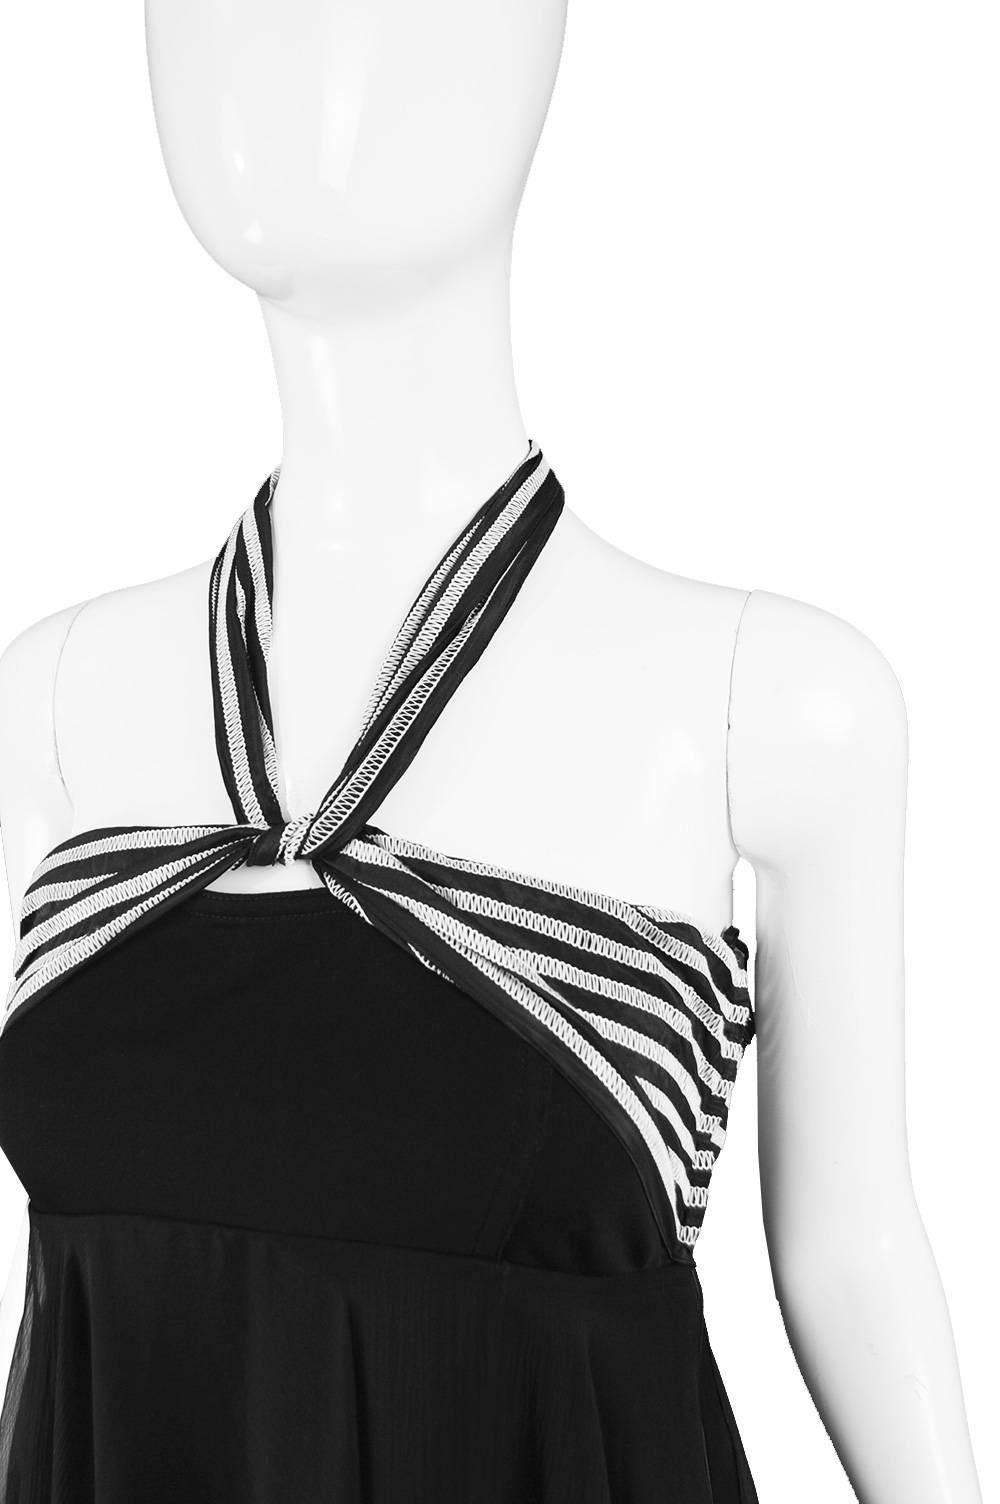 Angelo Tarlazzi Tiered Silk Chiffon and Black Jersey Halter Evening Dress, 1980s For Sale 2